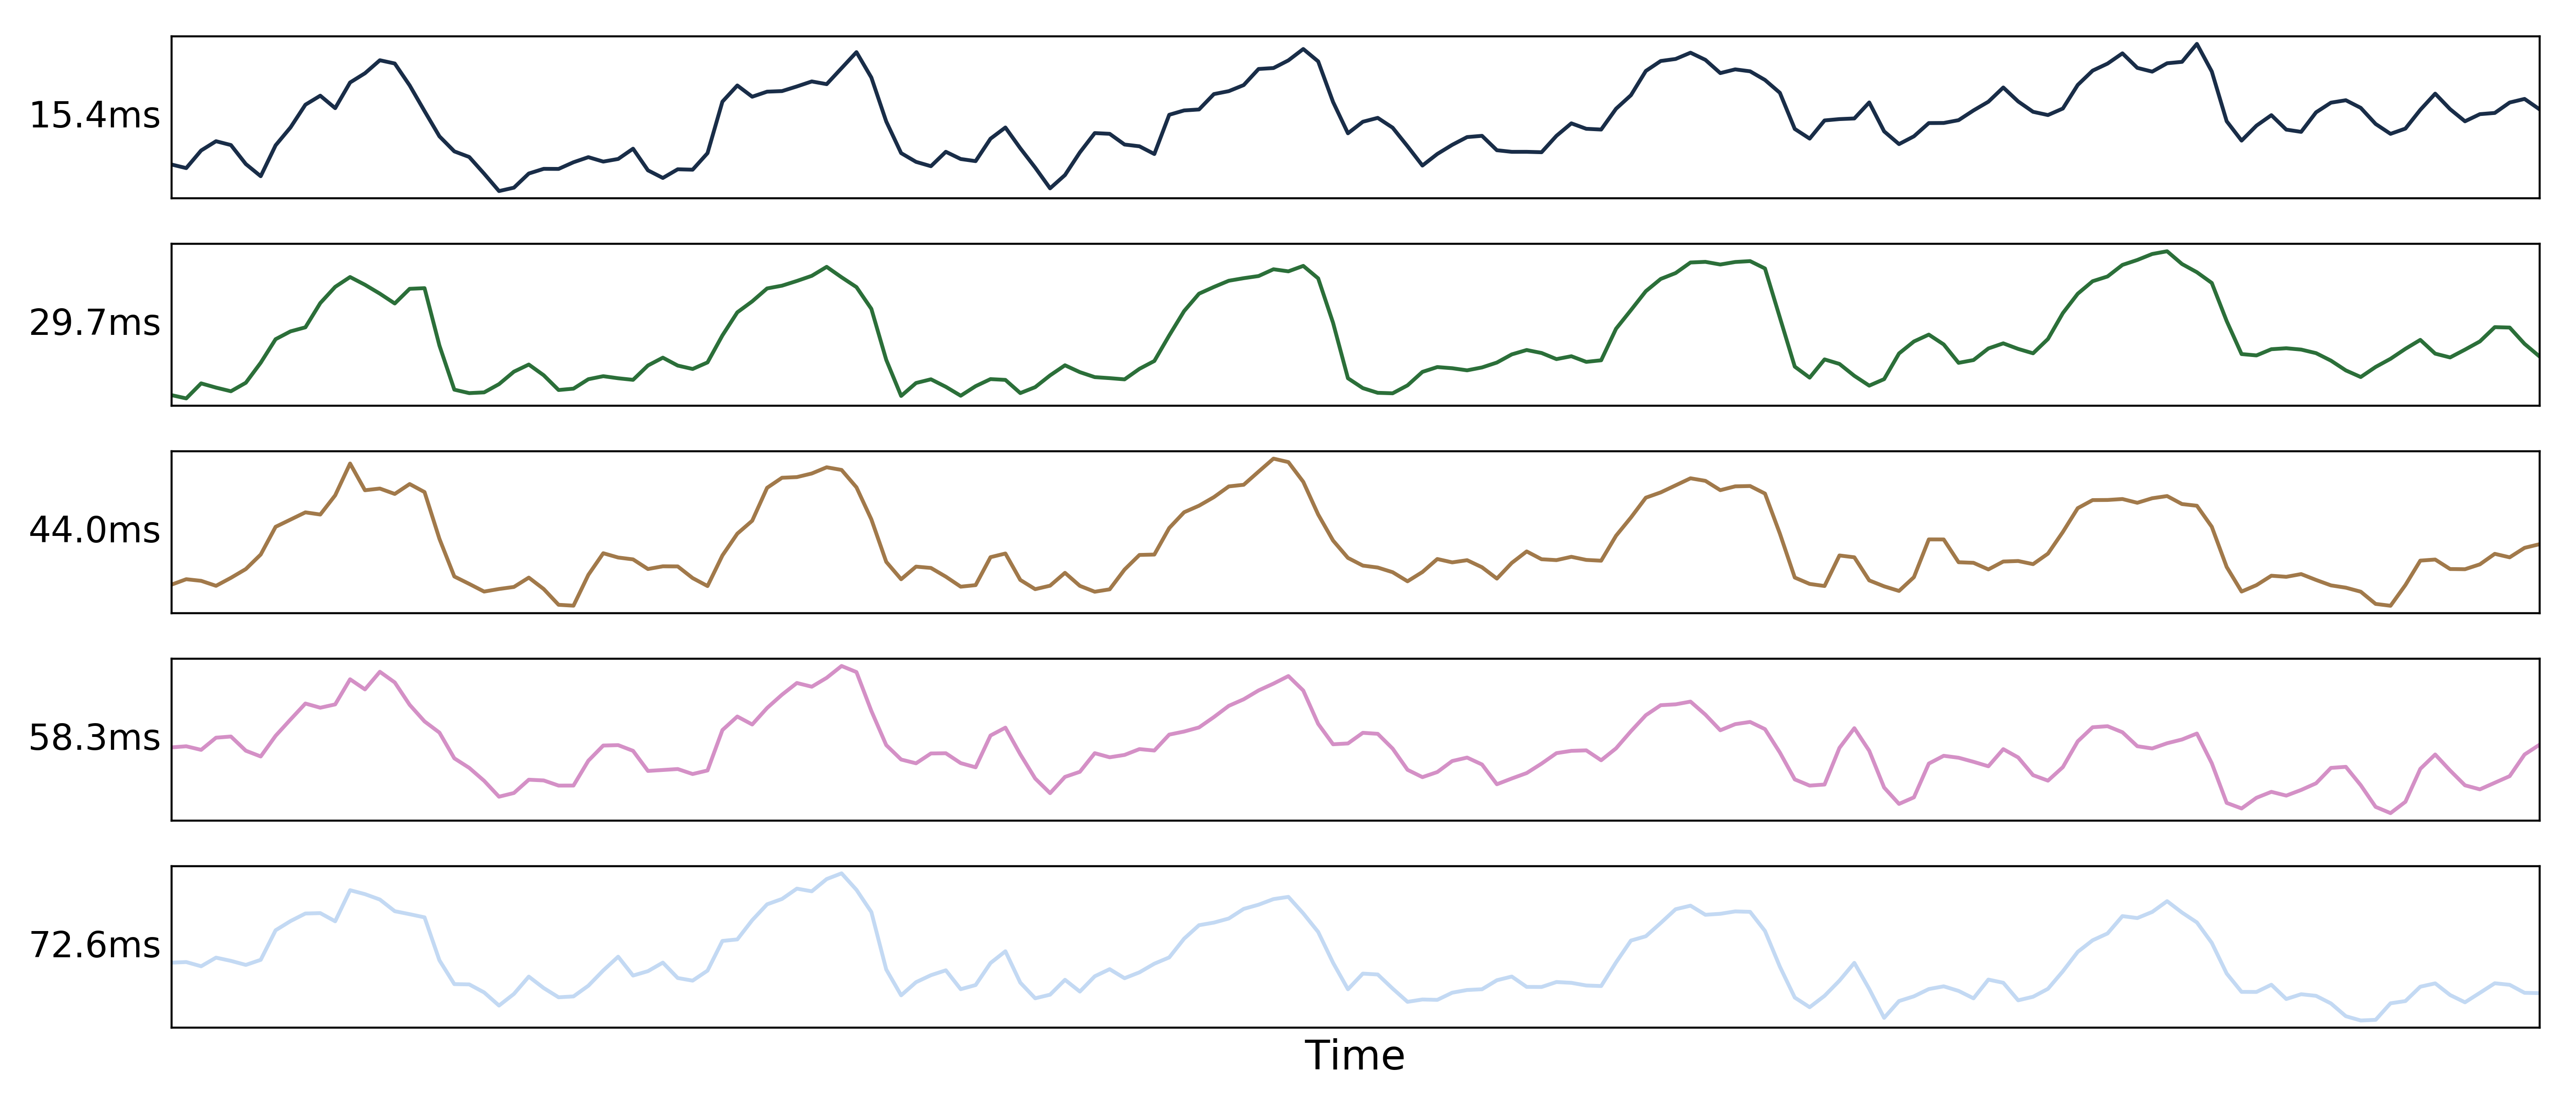 _images/01_echo_timeseries.png